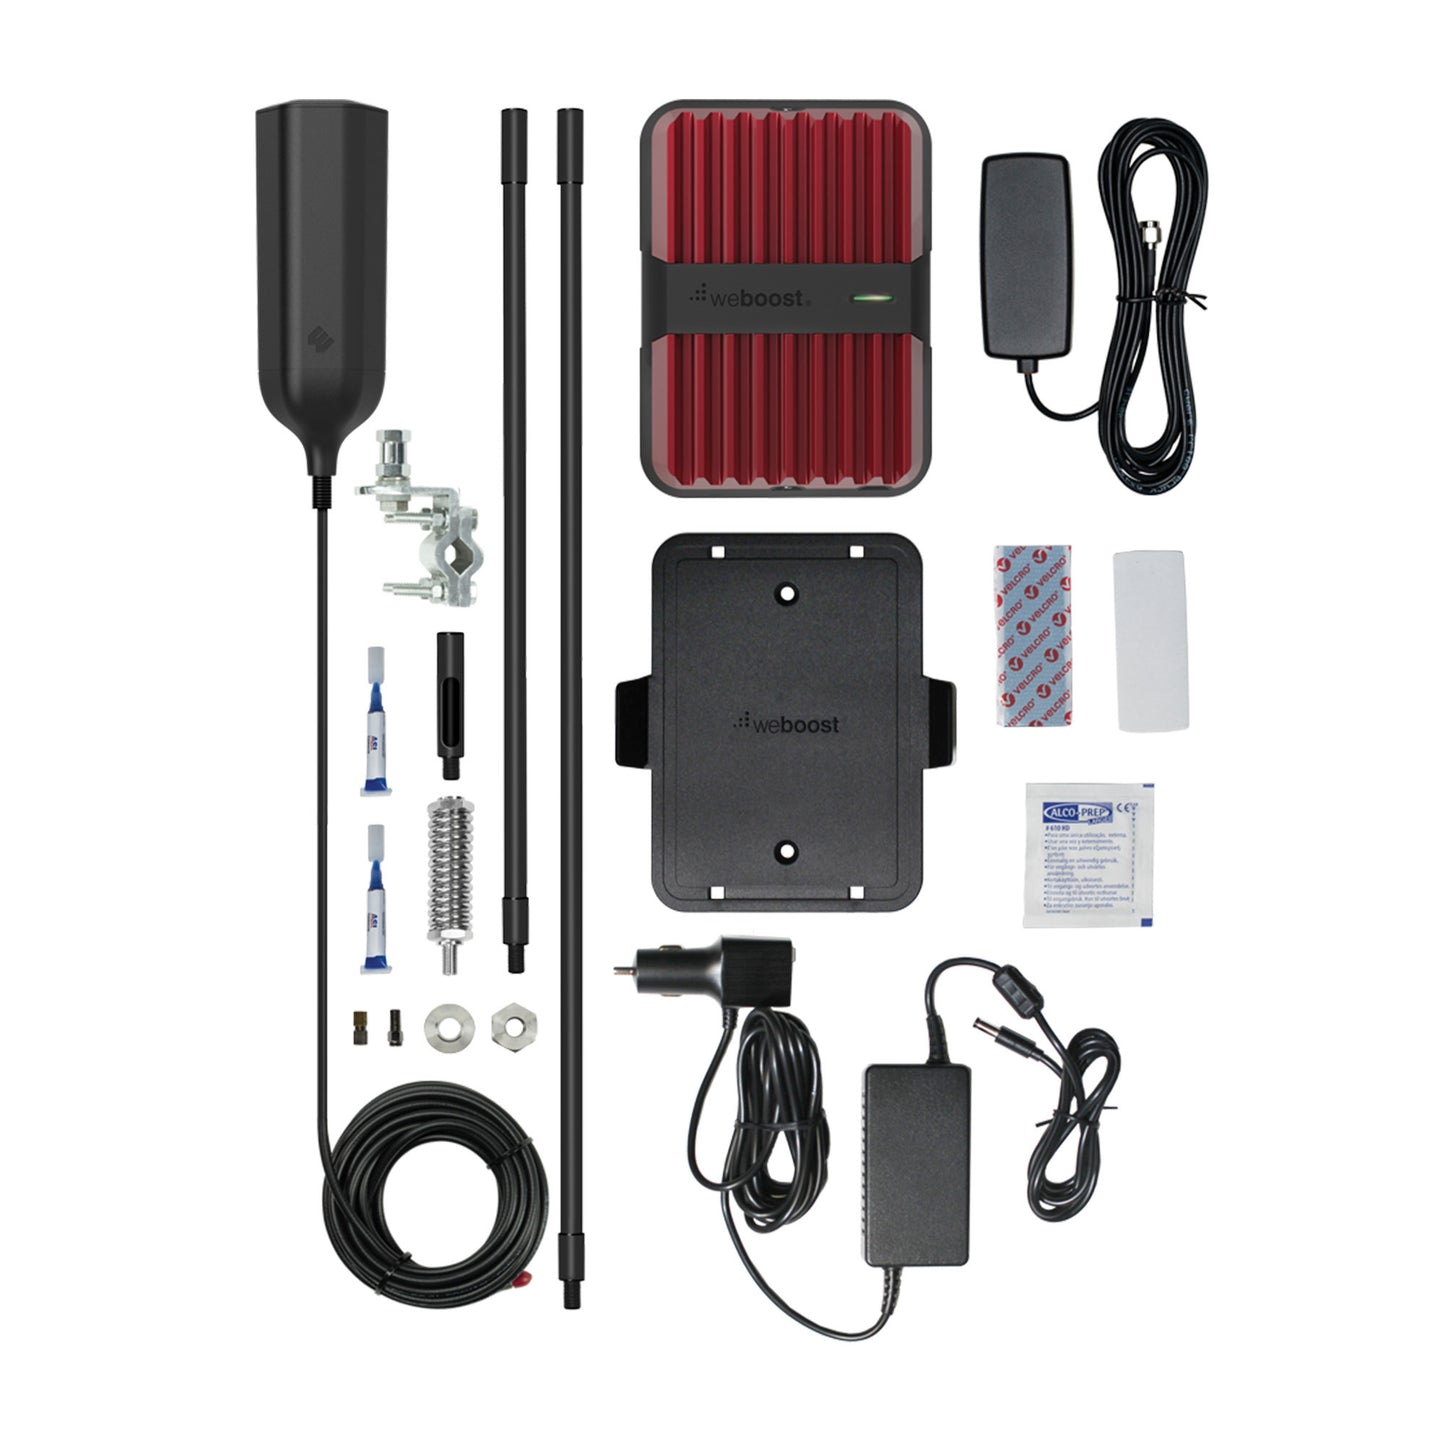 WeBoost Drive Reach OTR In-Vehicle Signal Booster Kit - 15-08430